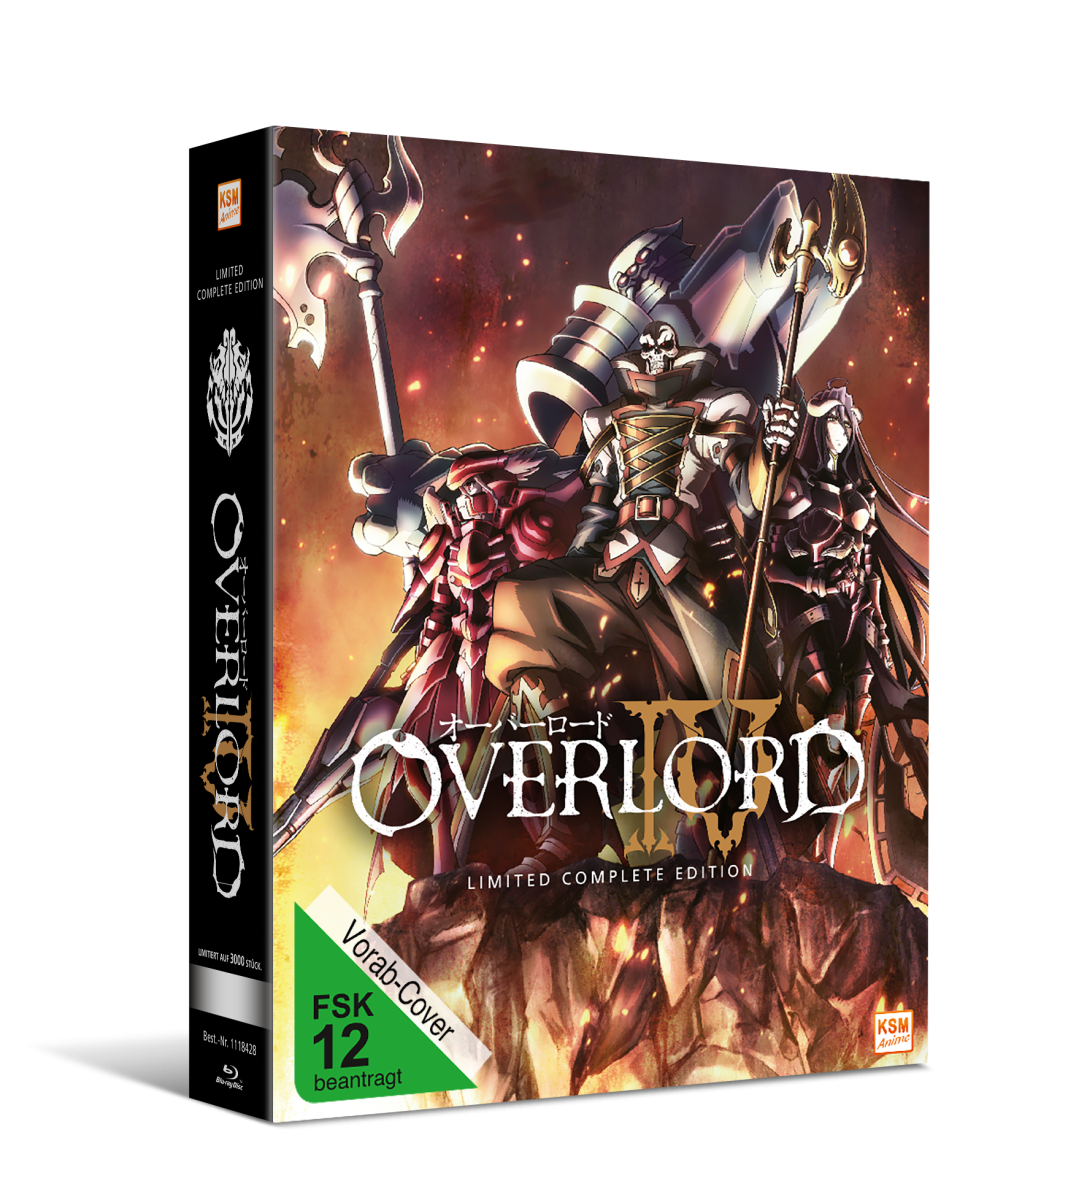 Overlord - Limited Complete Edition Staffel 4 (13 Episoden) [Blu-ray] Image 2